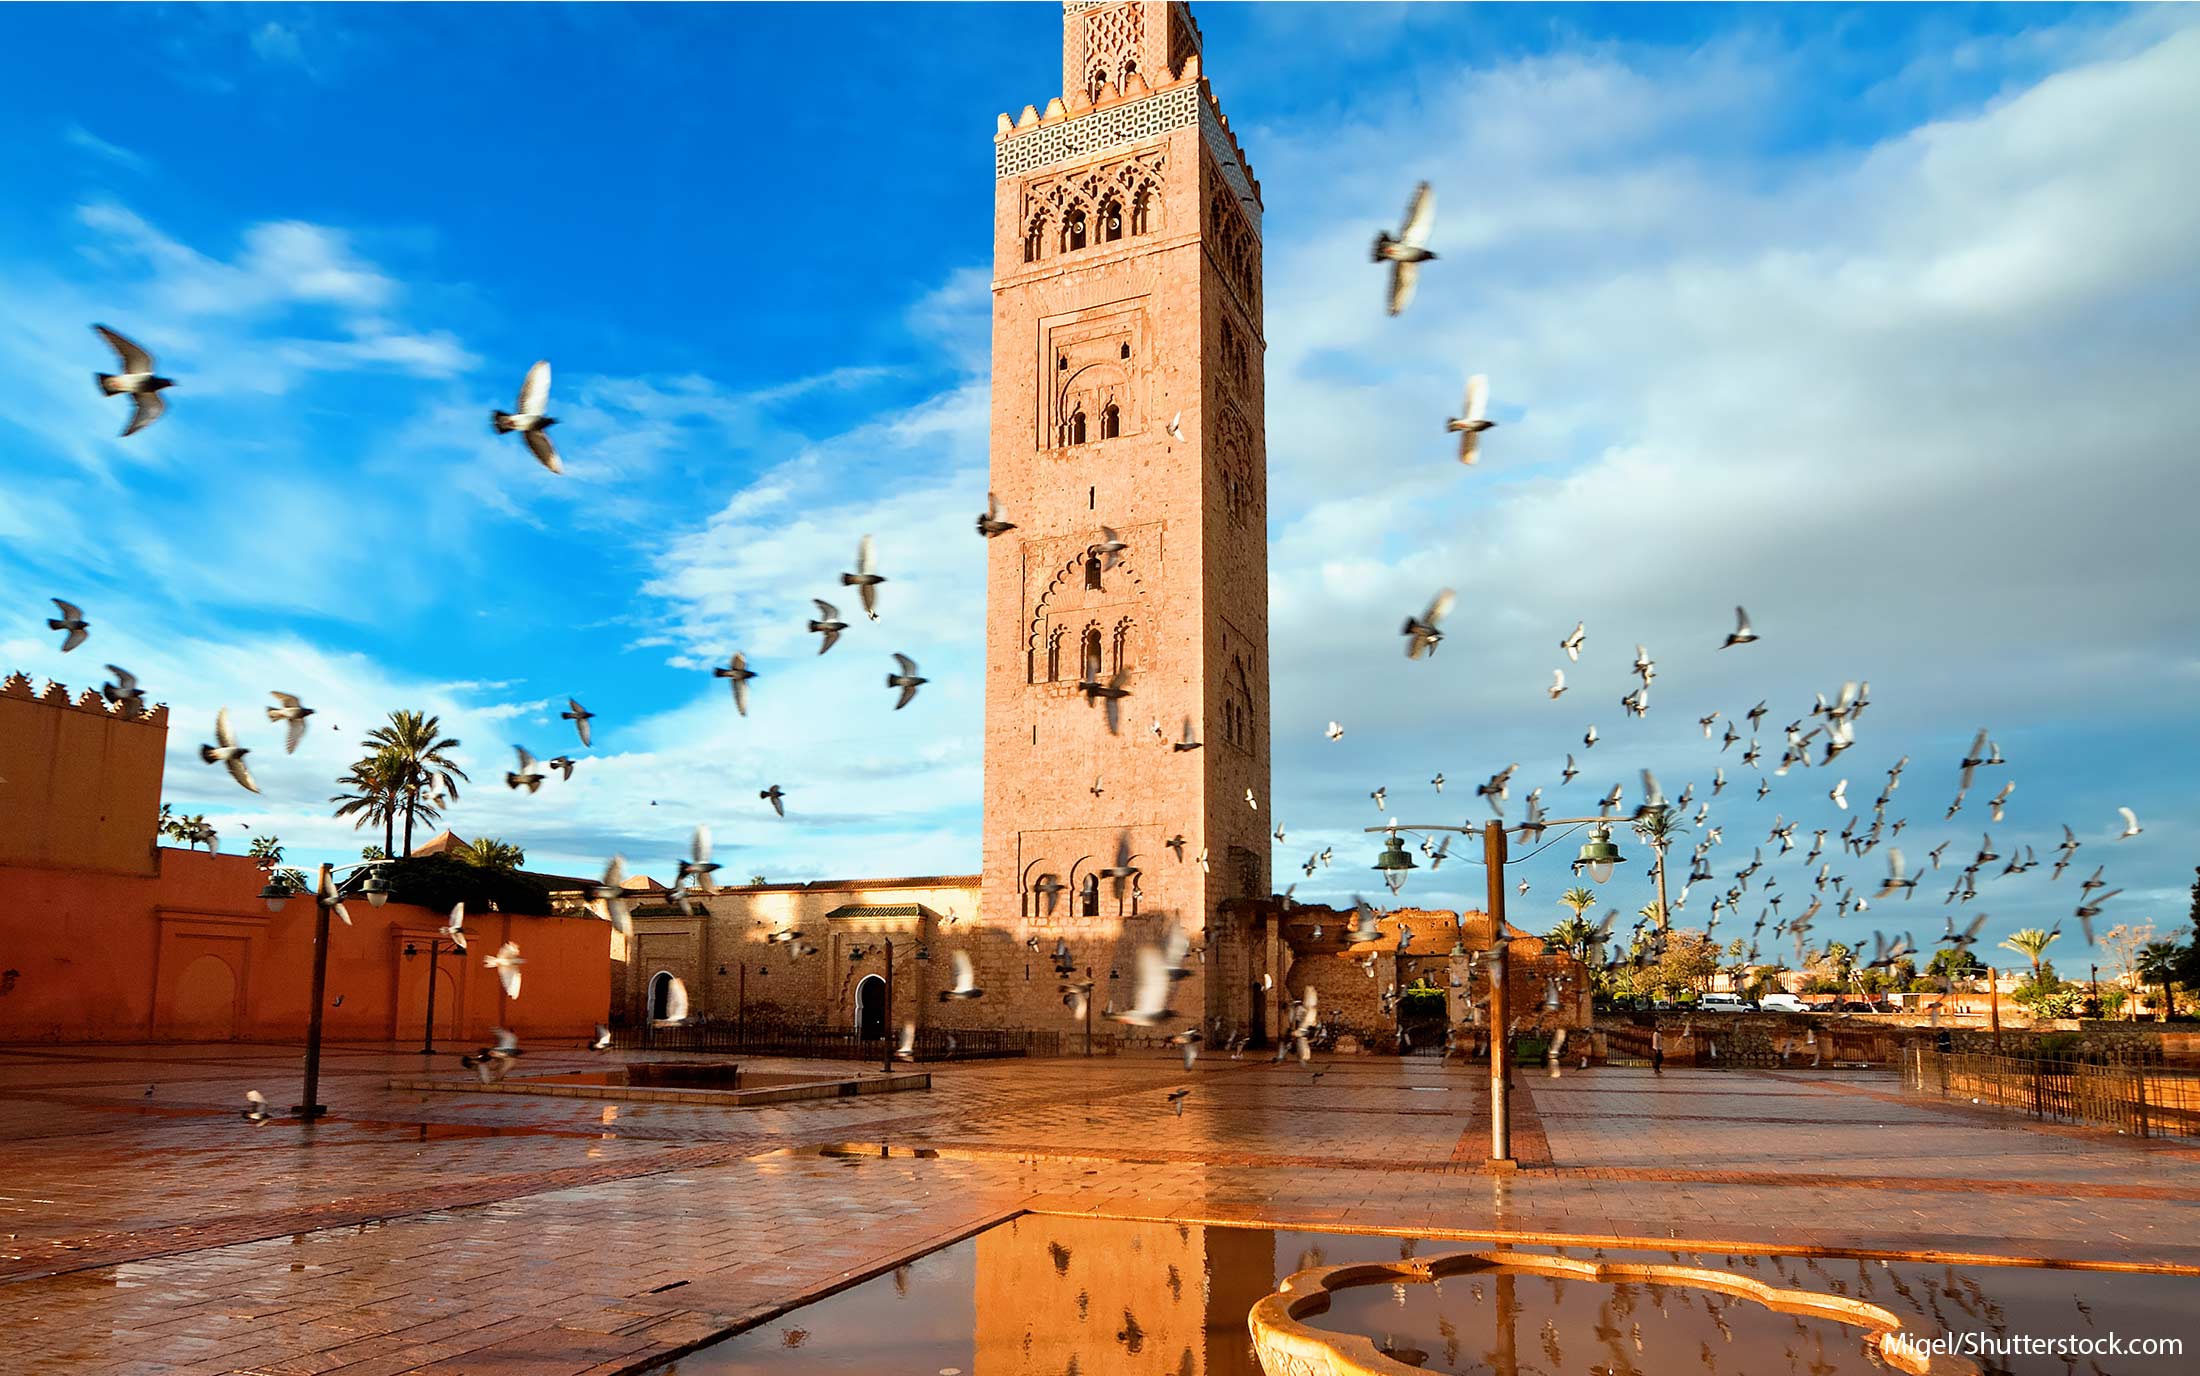 <ul> <li>Explore Worldwide's Grand Tour 20-day tour starts at $2,100, with the single room option starting at $440.</li> </ul> <p>Morocco offers everything from mountains to deserts to coastal climes. Visitors to the country can see the sights of Rabat, Meknes, Fes and Marrakech. Explore Worldwide's Imperial Cities and Deserts Tour takes travelers around exotic souks, or open-air markets, through gorges in the Atlas Mountains and on to discover desert oases, with the option of spending a night in the Sahara Desert.</p>